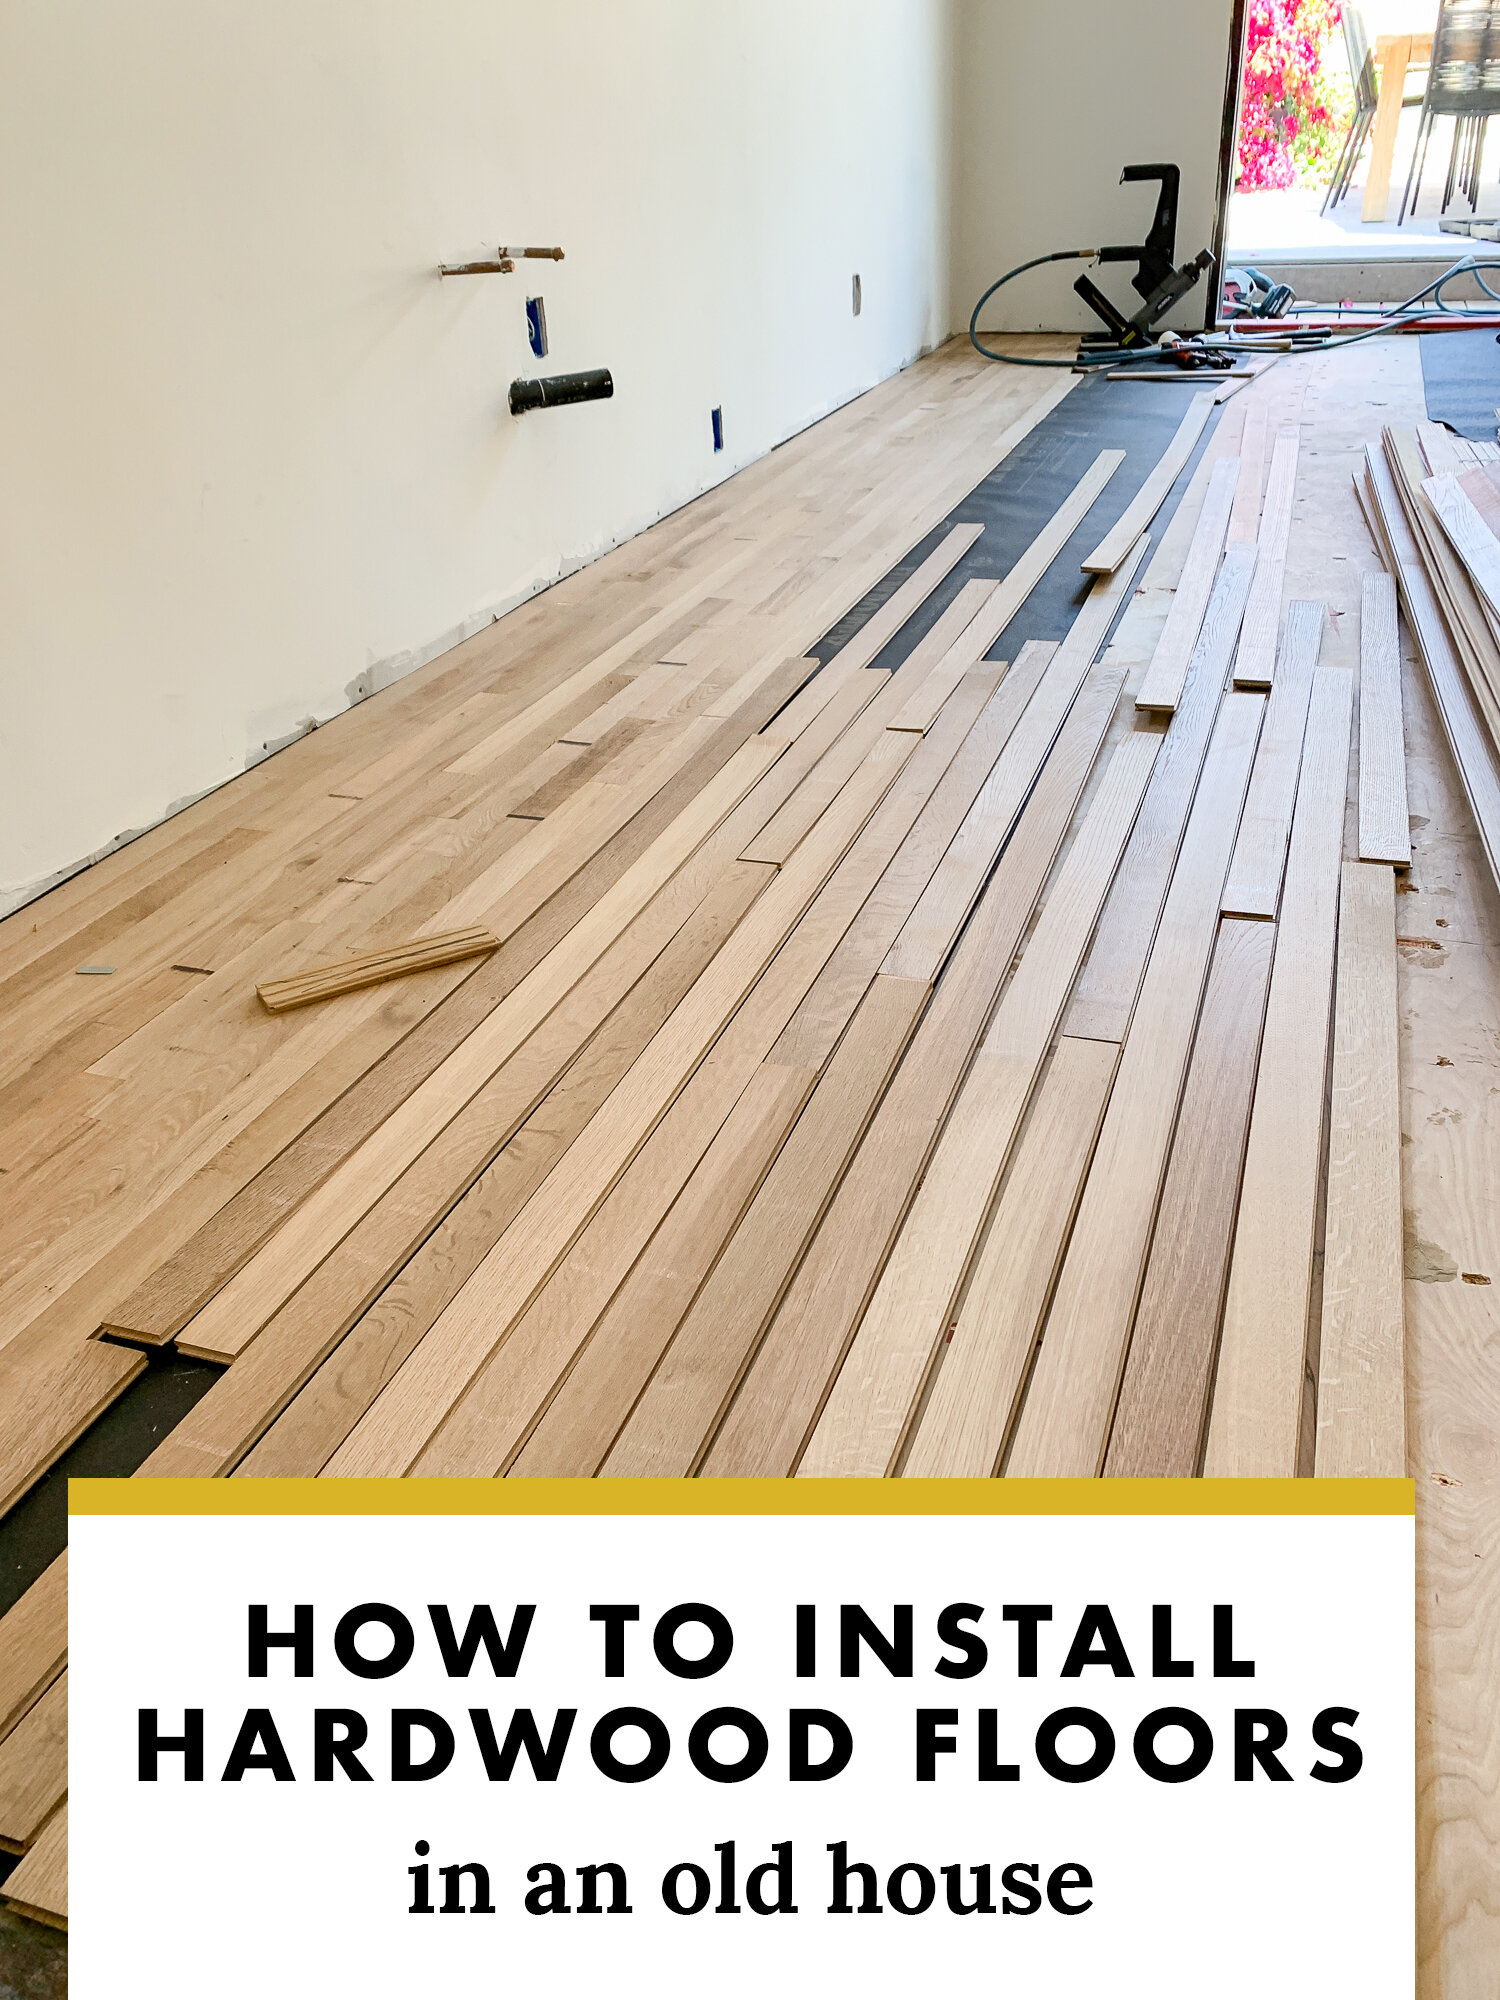 Installing New Hardwood Floors In Our, Laying Real Hardwood Floors